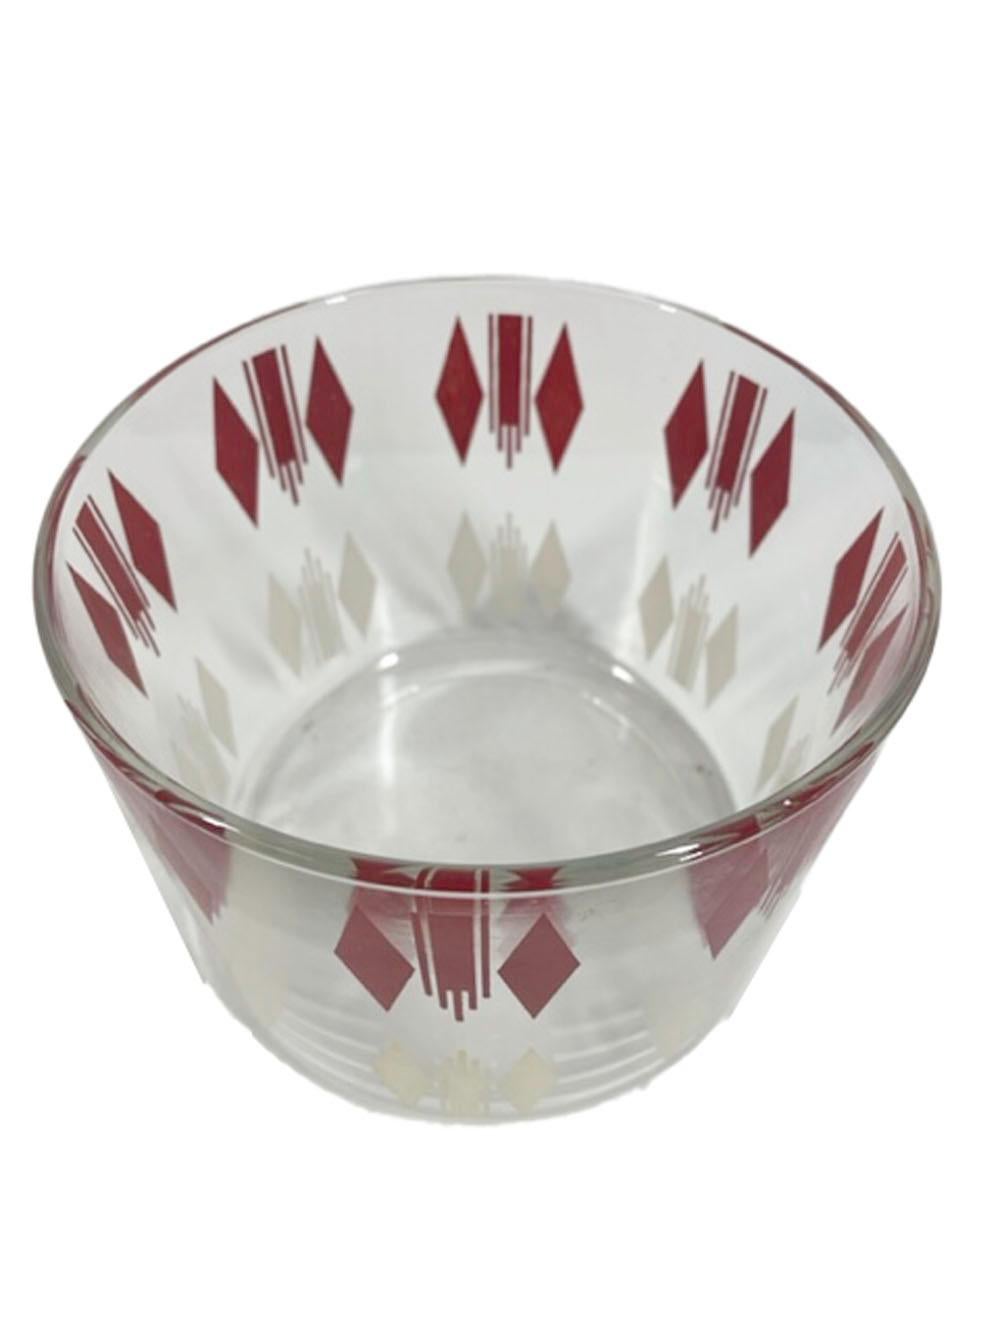 20th Century Art Deco Red and White Enamel Decorated Cocktail Shaker, Ice Bowl and 4 Glasses For Sale